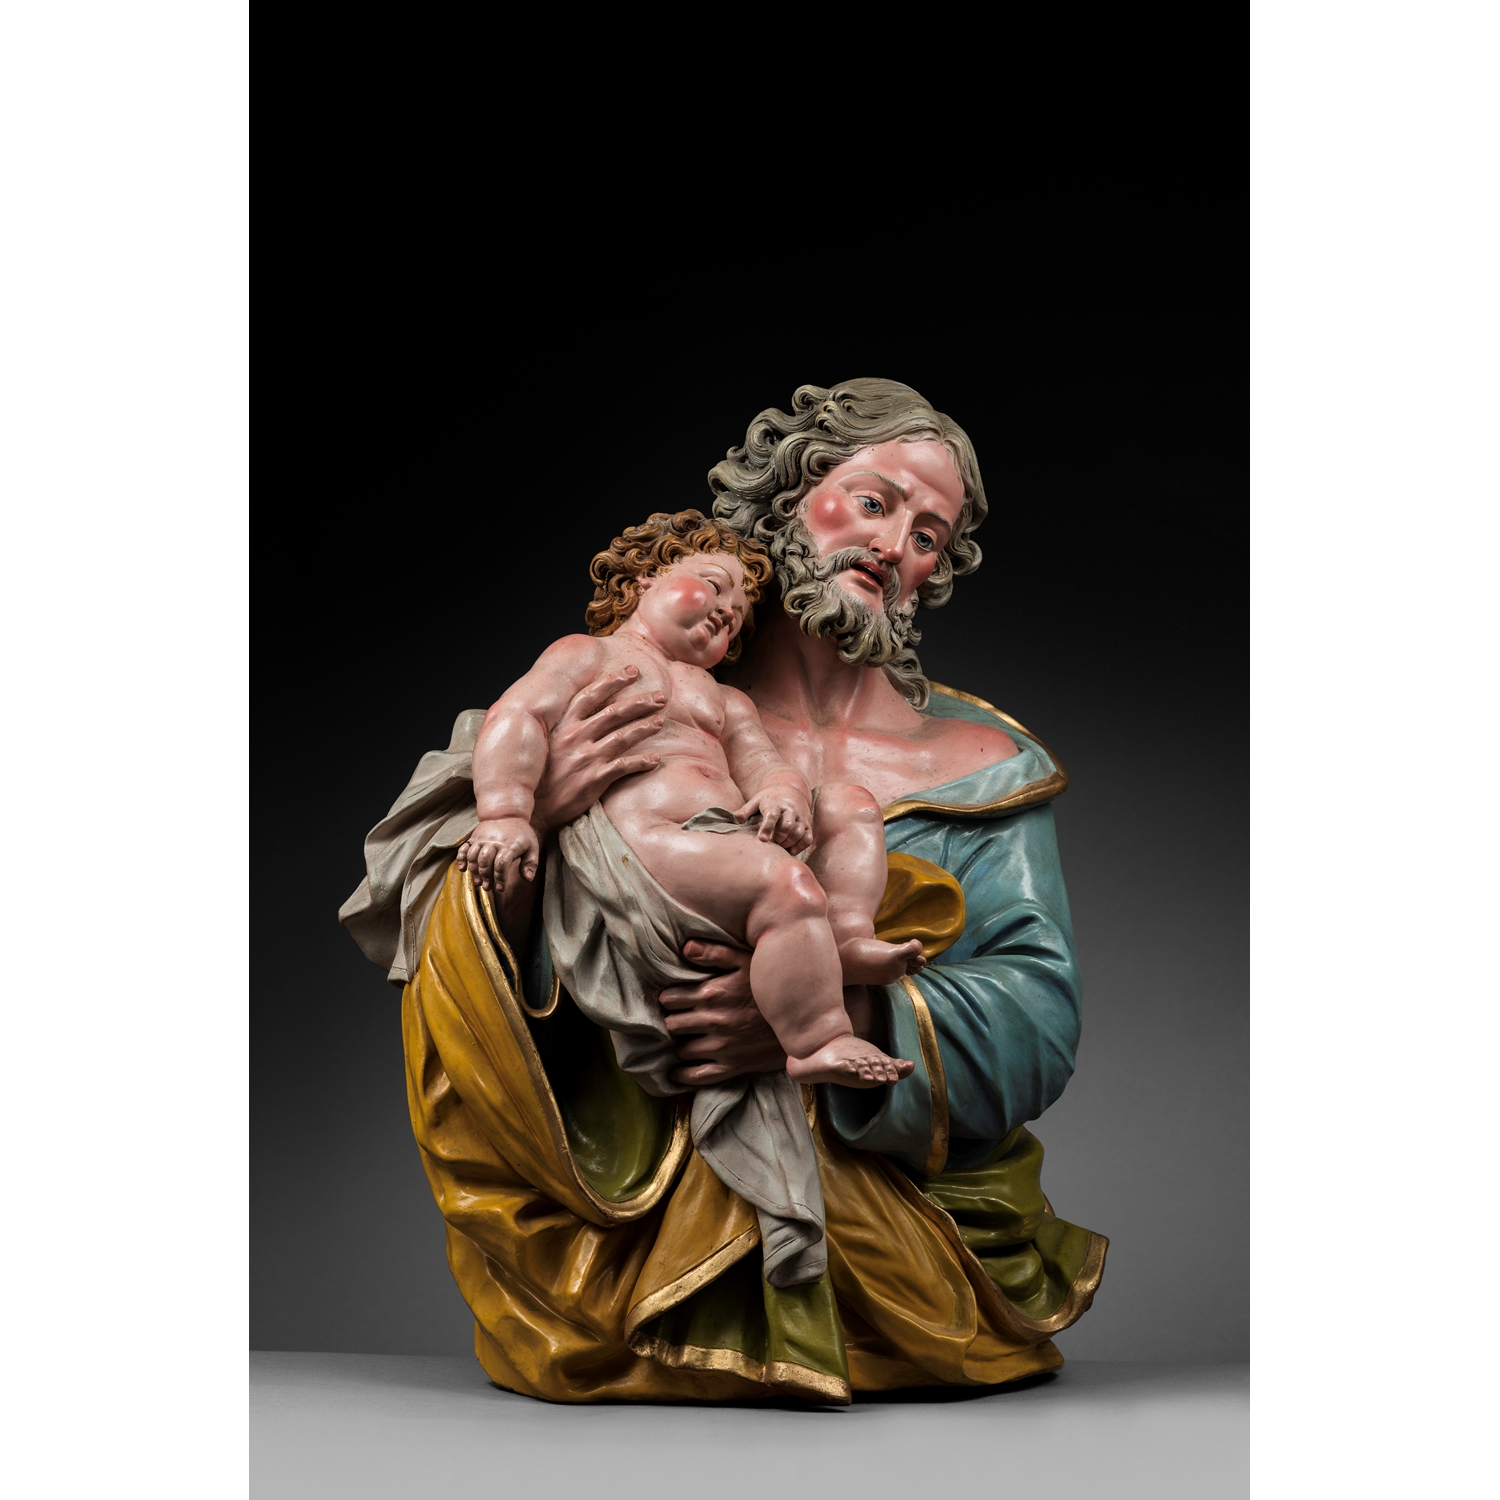 ATTRIBUTED TO GIUSEPPE PICANO  ( 1716 - 1810 ) SAINT JOSEPH AND THE CHRIST CHILD